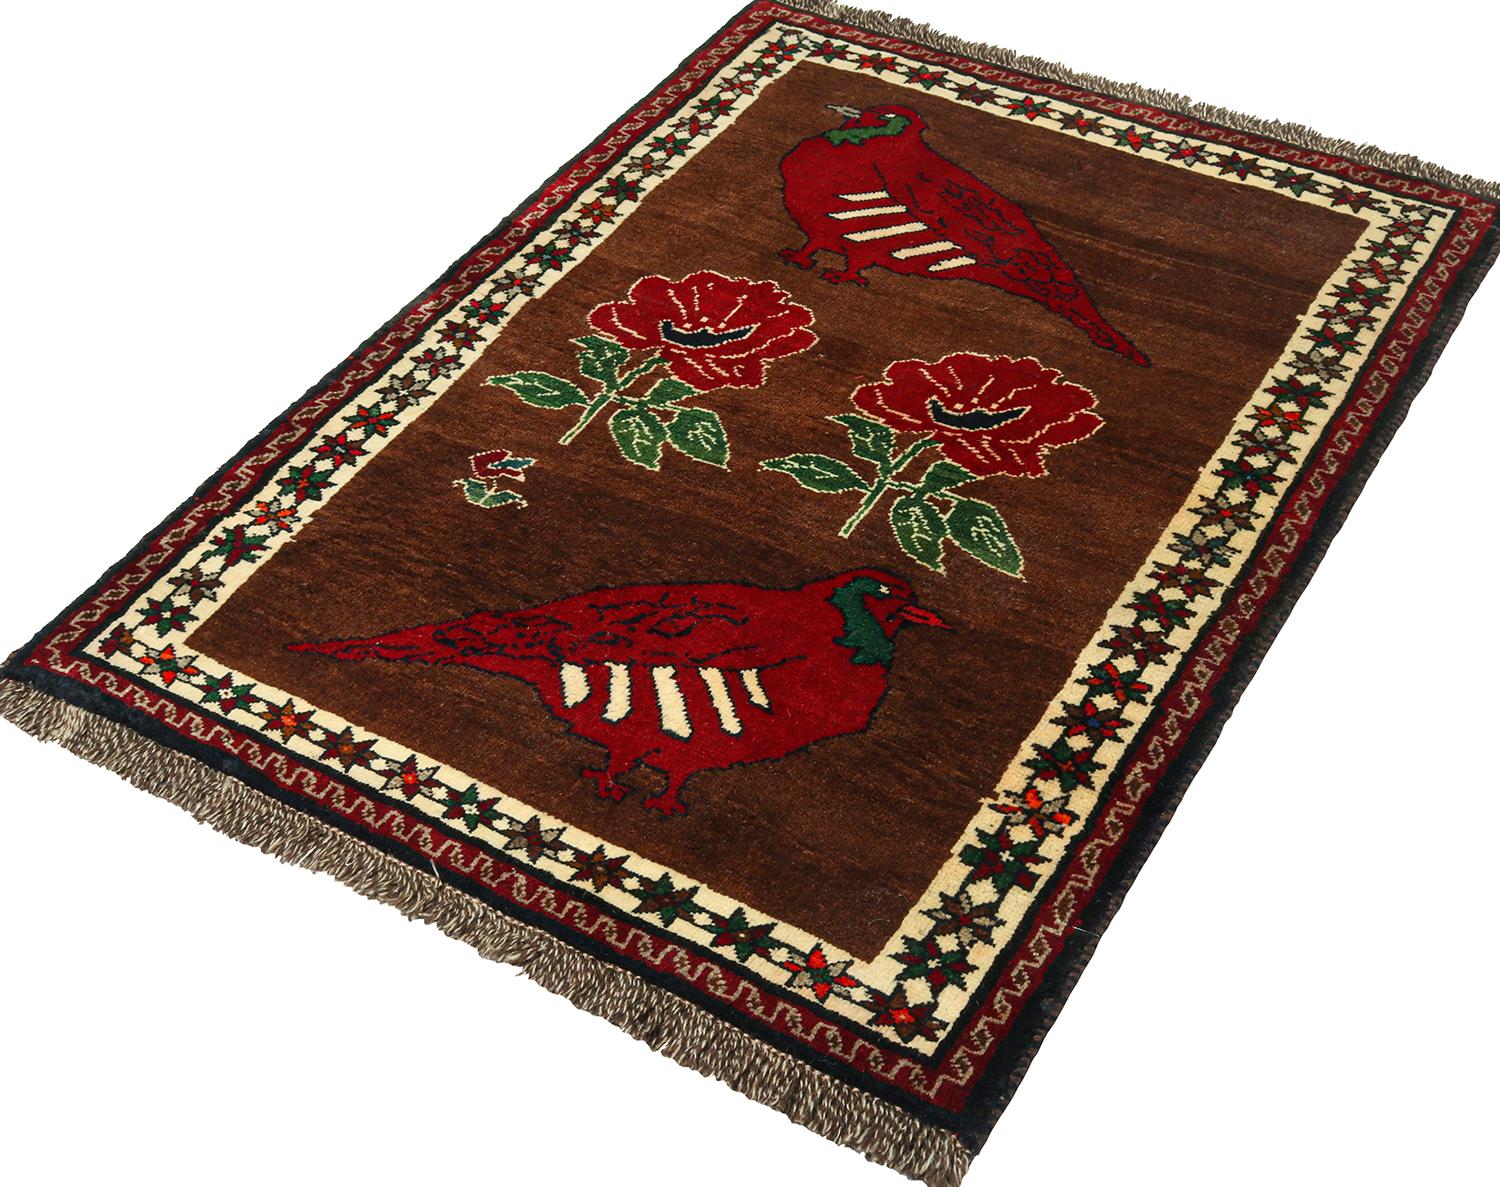 A 4x5 vintage Persian Gabbeh rug, hand-knotted in wool circa 1950-1960. One of the latest additions to Rug & Kilim’s curation of rare tribal pieces, with an individualistic attitude and collectible design. 

On the Design: 

The mid-century